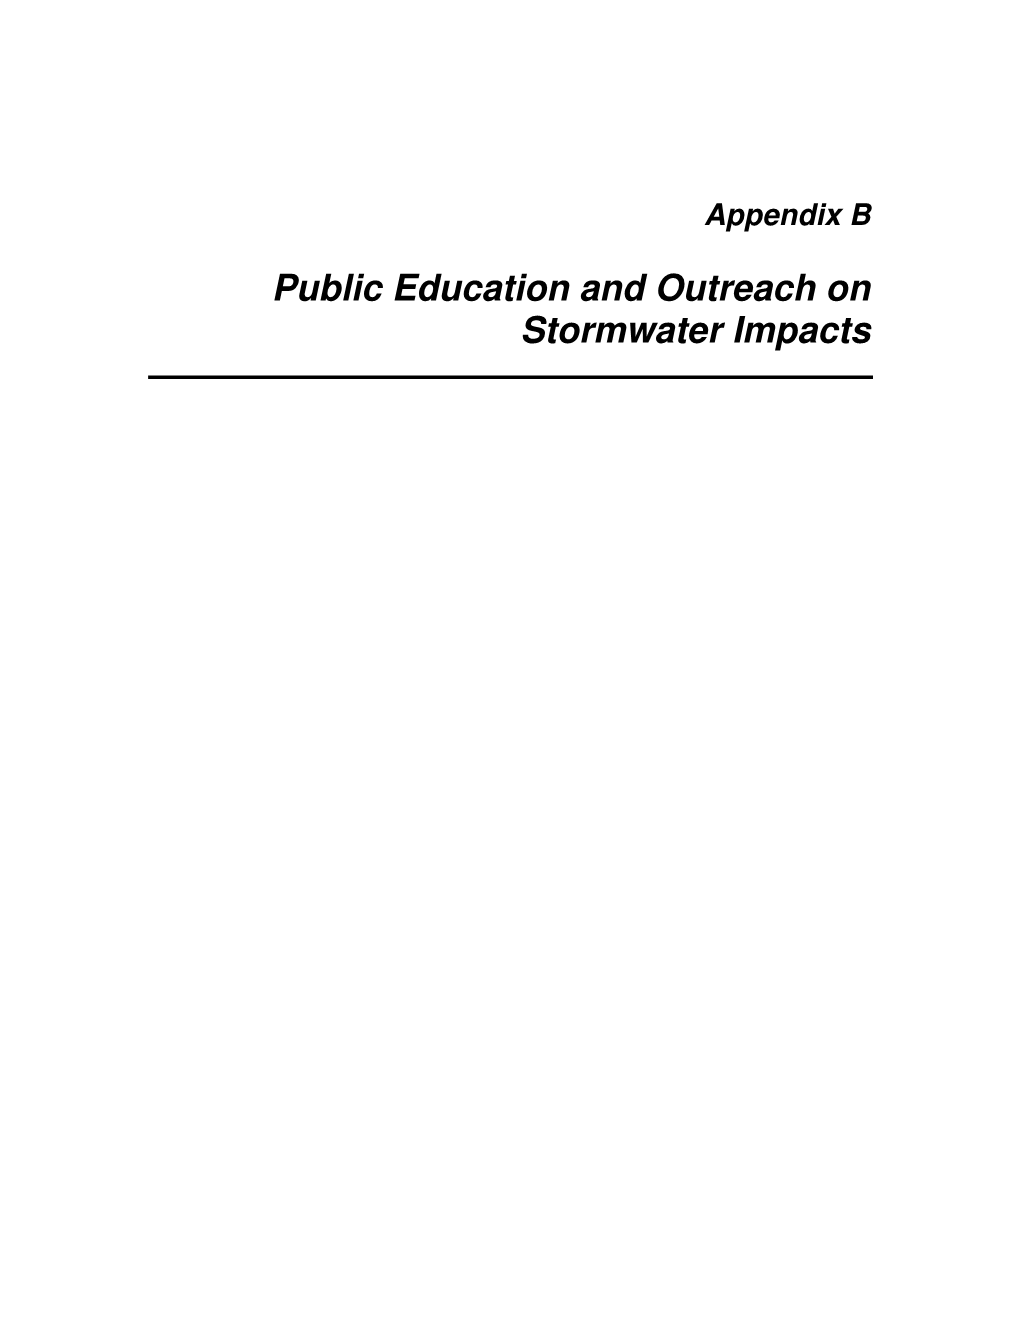 Public Education and Outreach on Stormwater Impacts